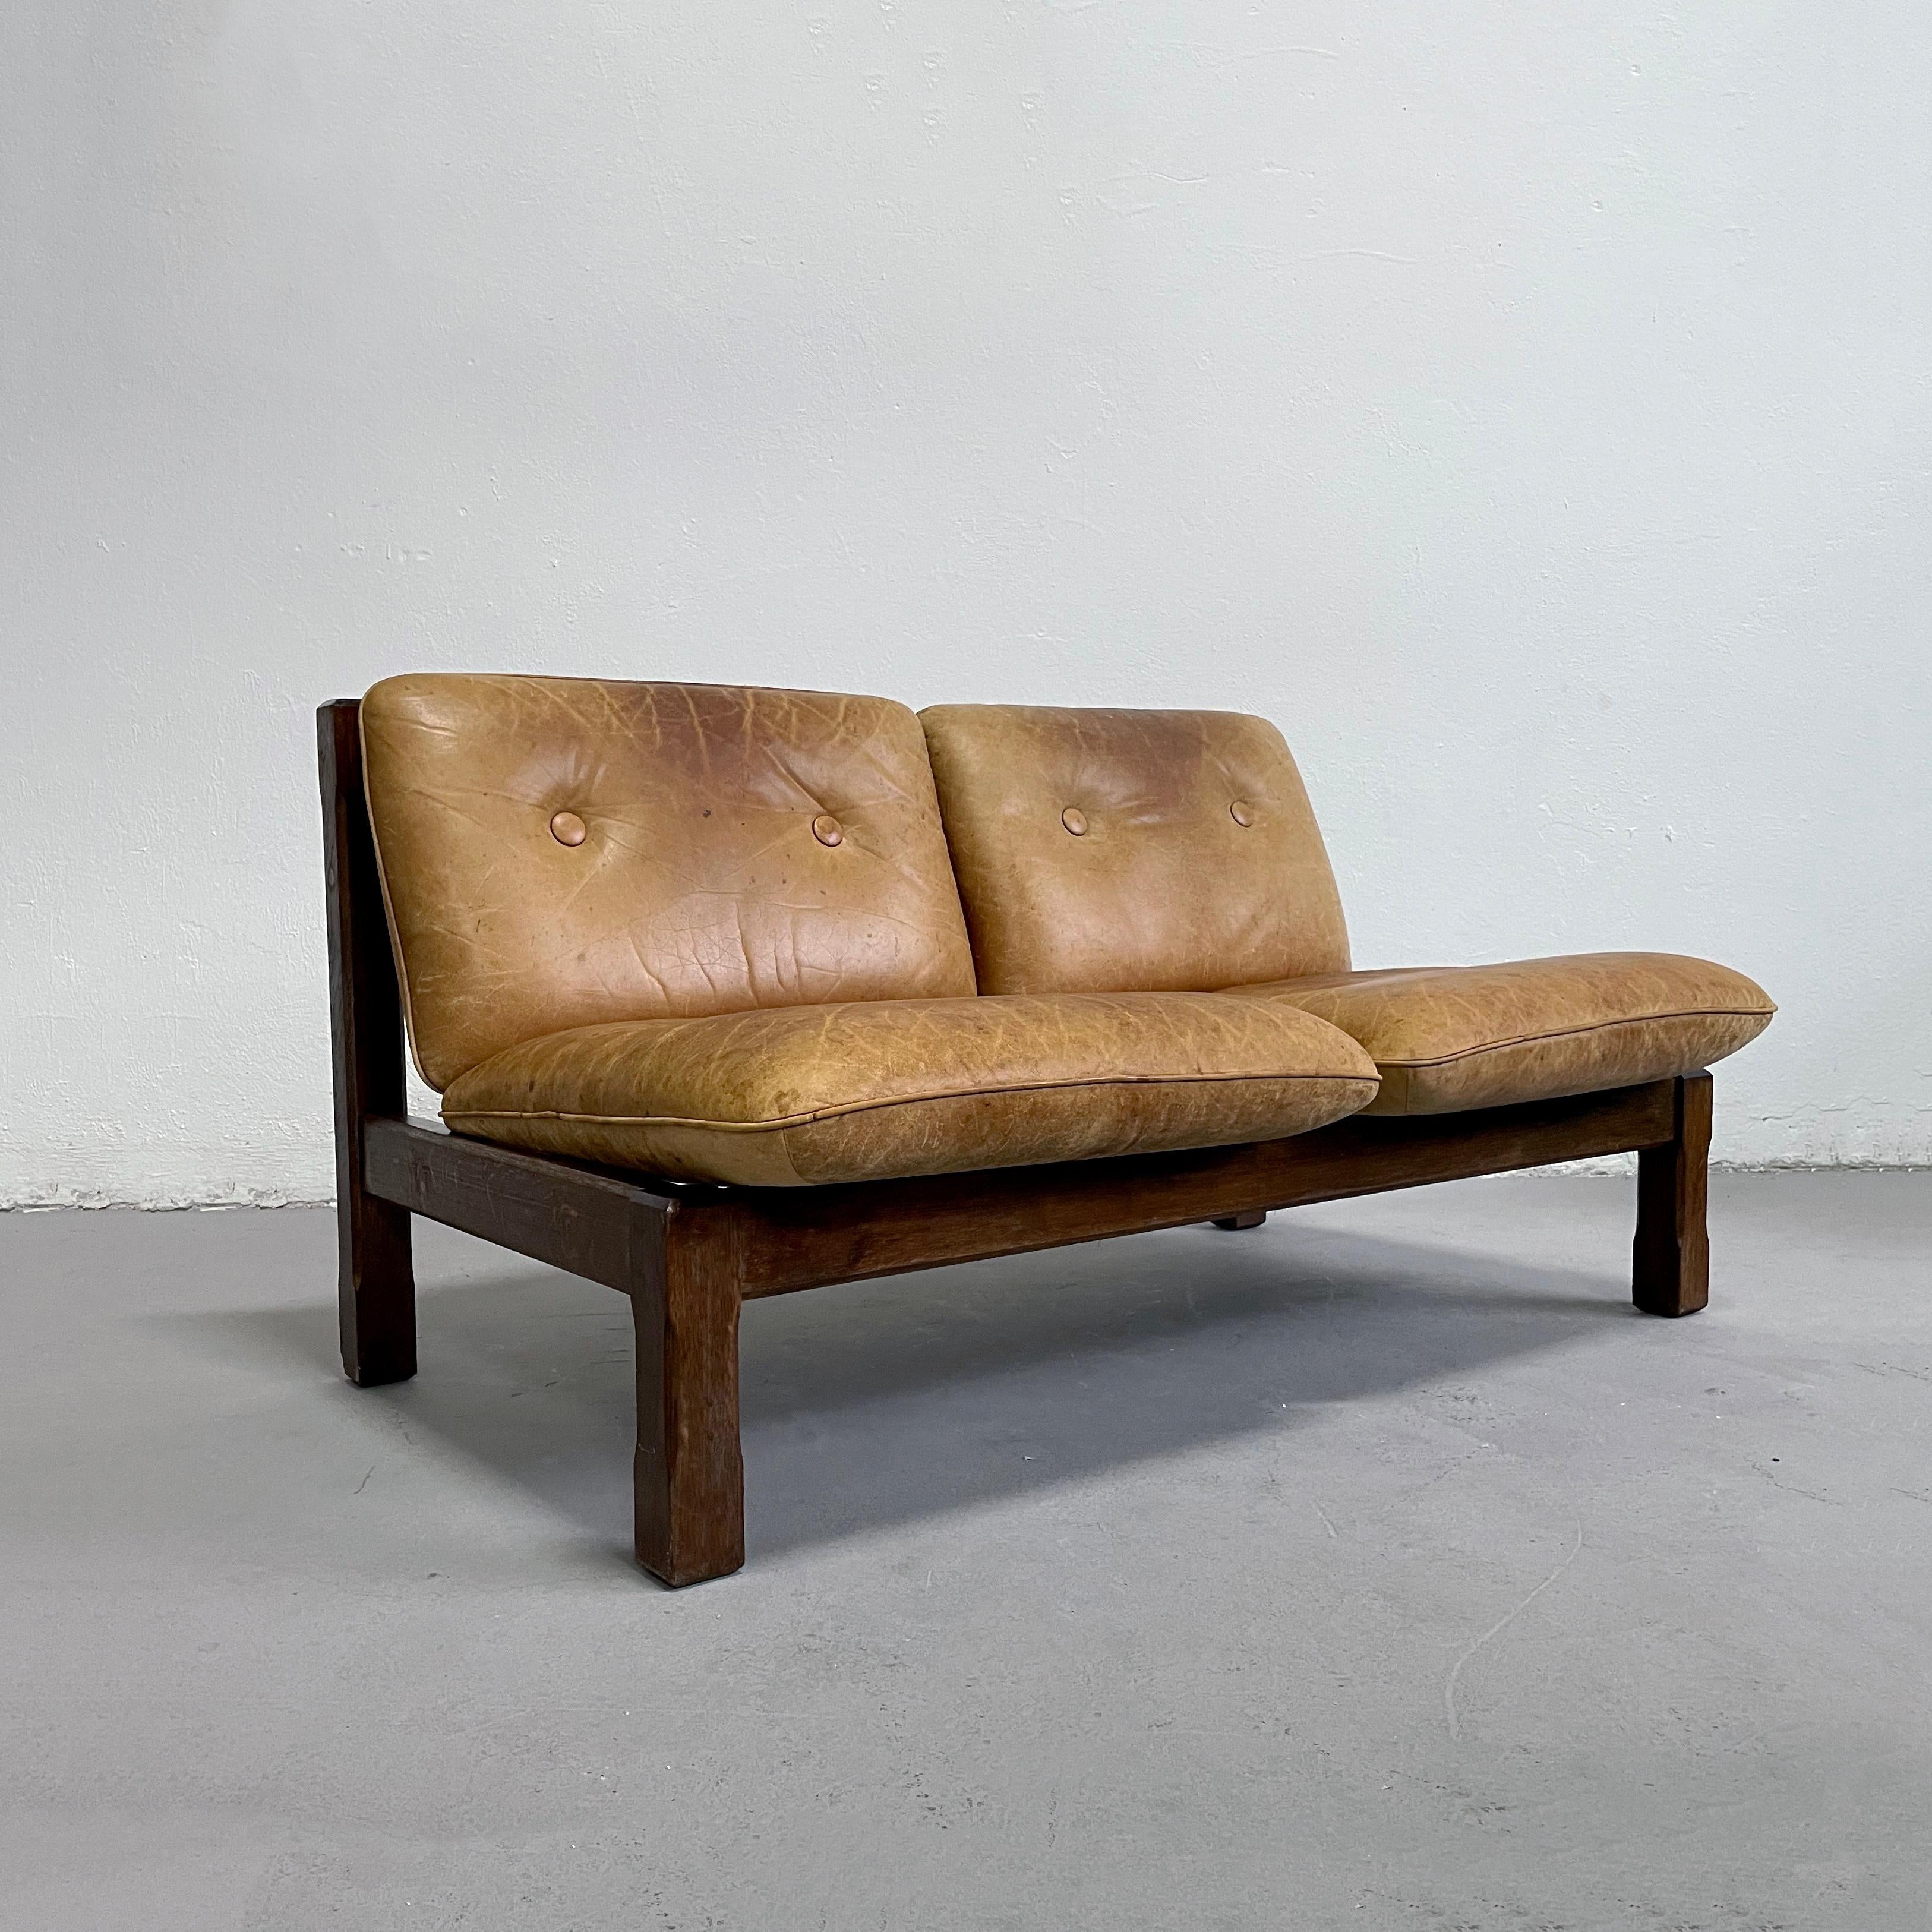 Vintage brutalist 2-seater sofa featuring solid oak frame and leather cushions

The leather is worn and has a lot of nice patina. It was professionally cleaned and the item is in good functional condition as intended.